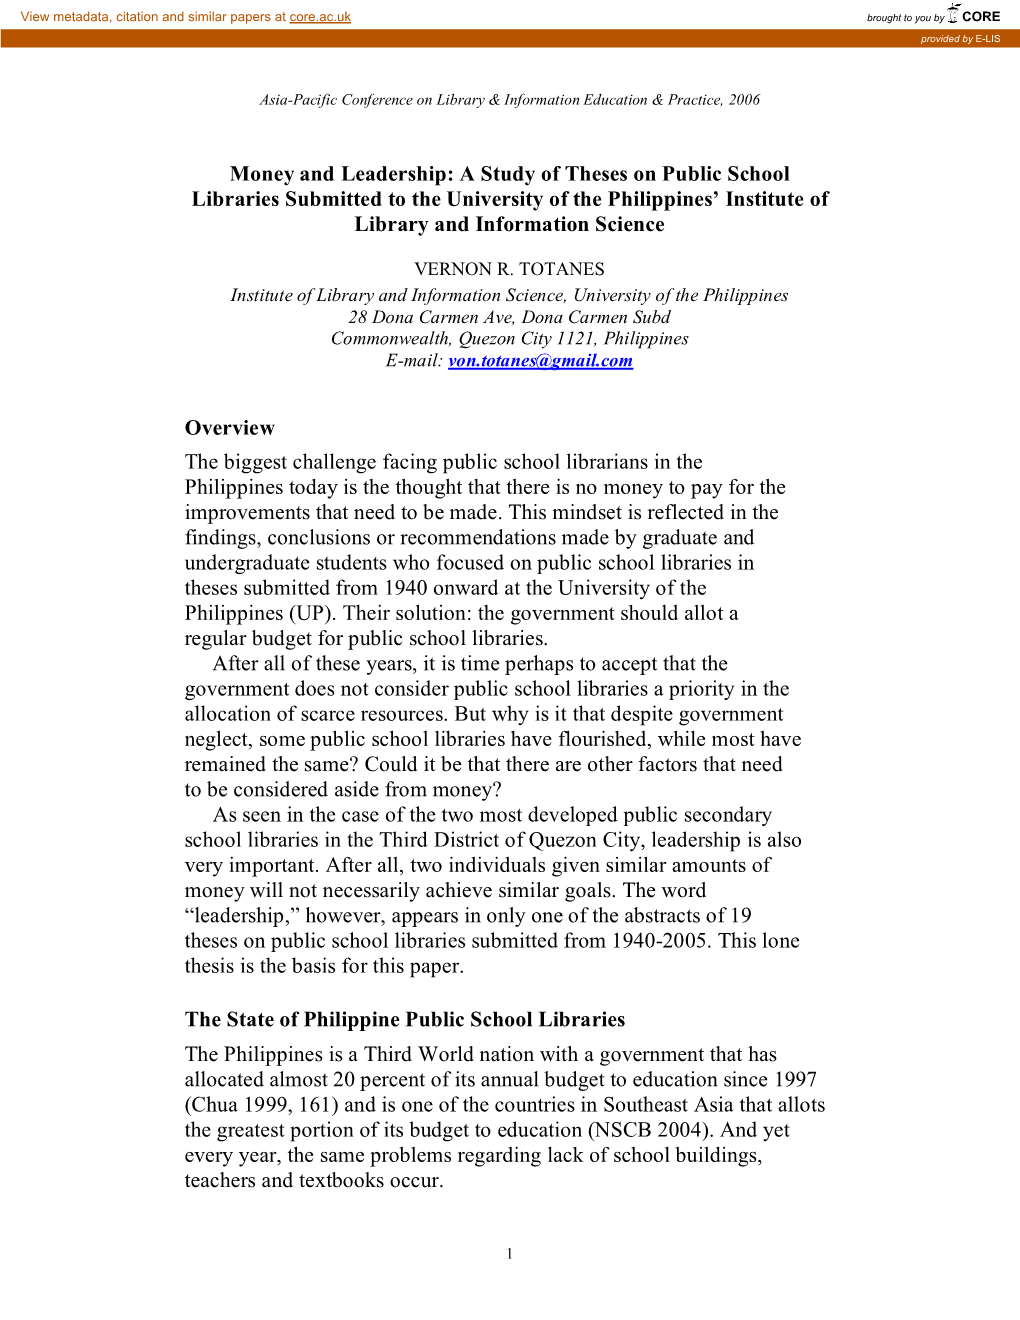 Money and Leadership: a Study of Theses on Public School Libraries Submitted to the University of the Philippines’ Institute of Library and Information Science